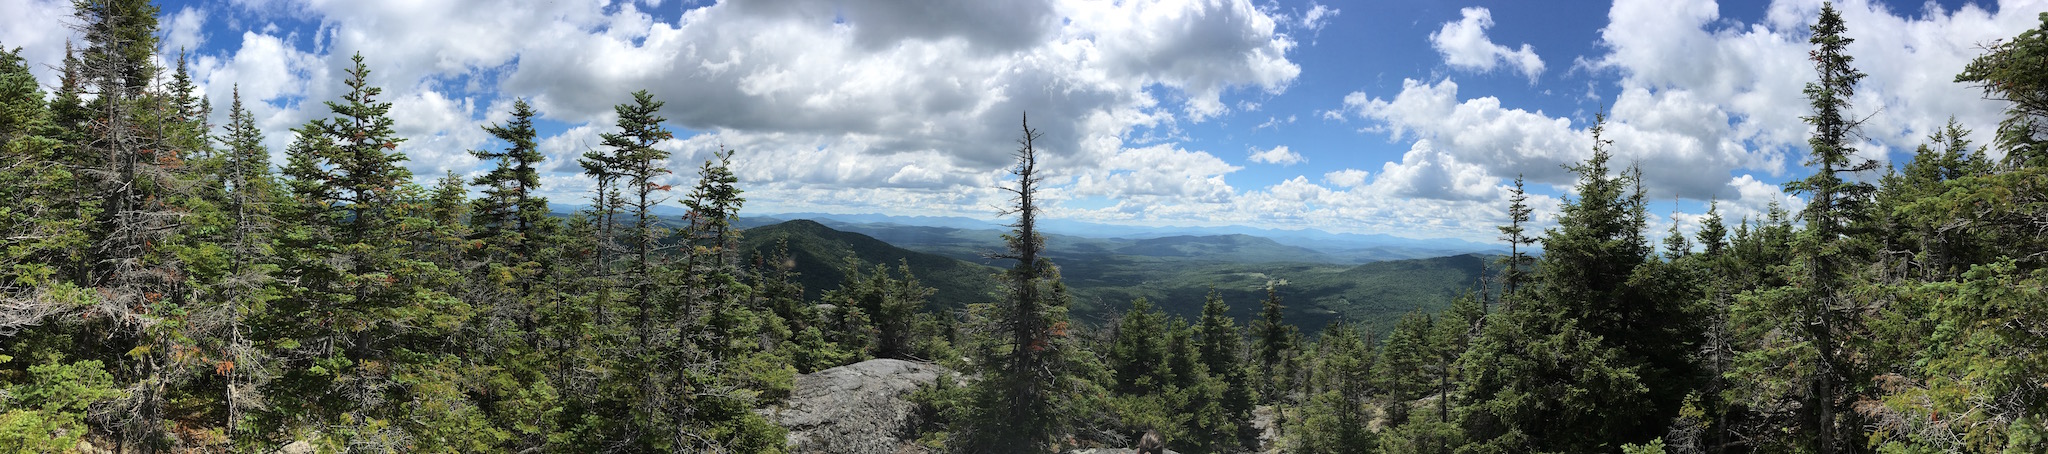 The view from near the top of Mount Burke - <a href="mount_burke_view.jpg">large view</a>